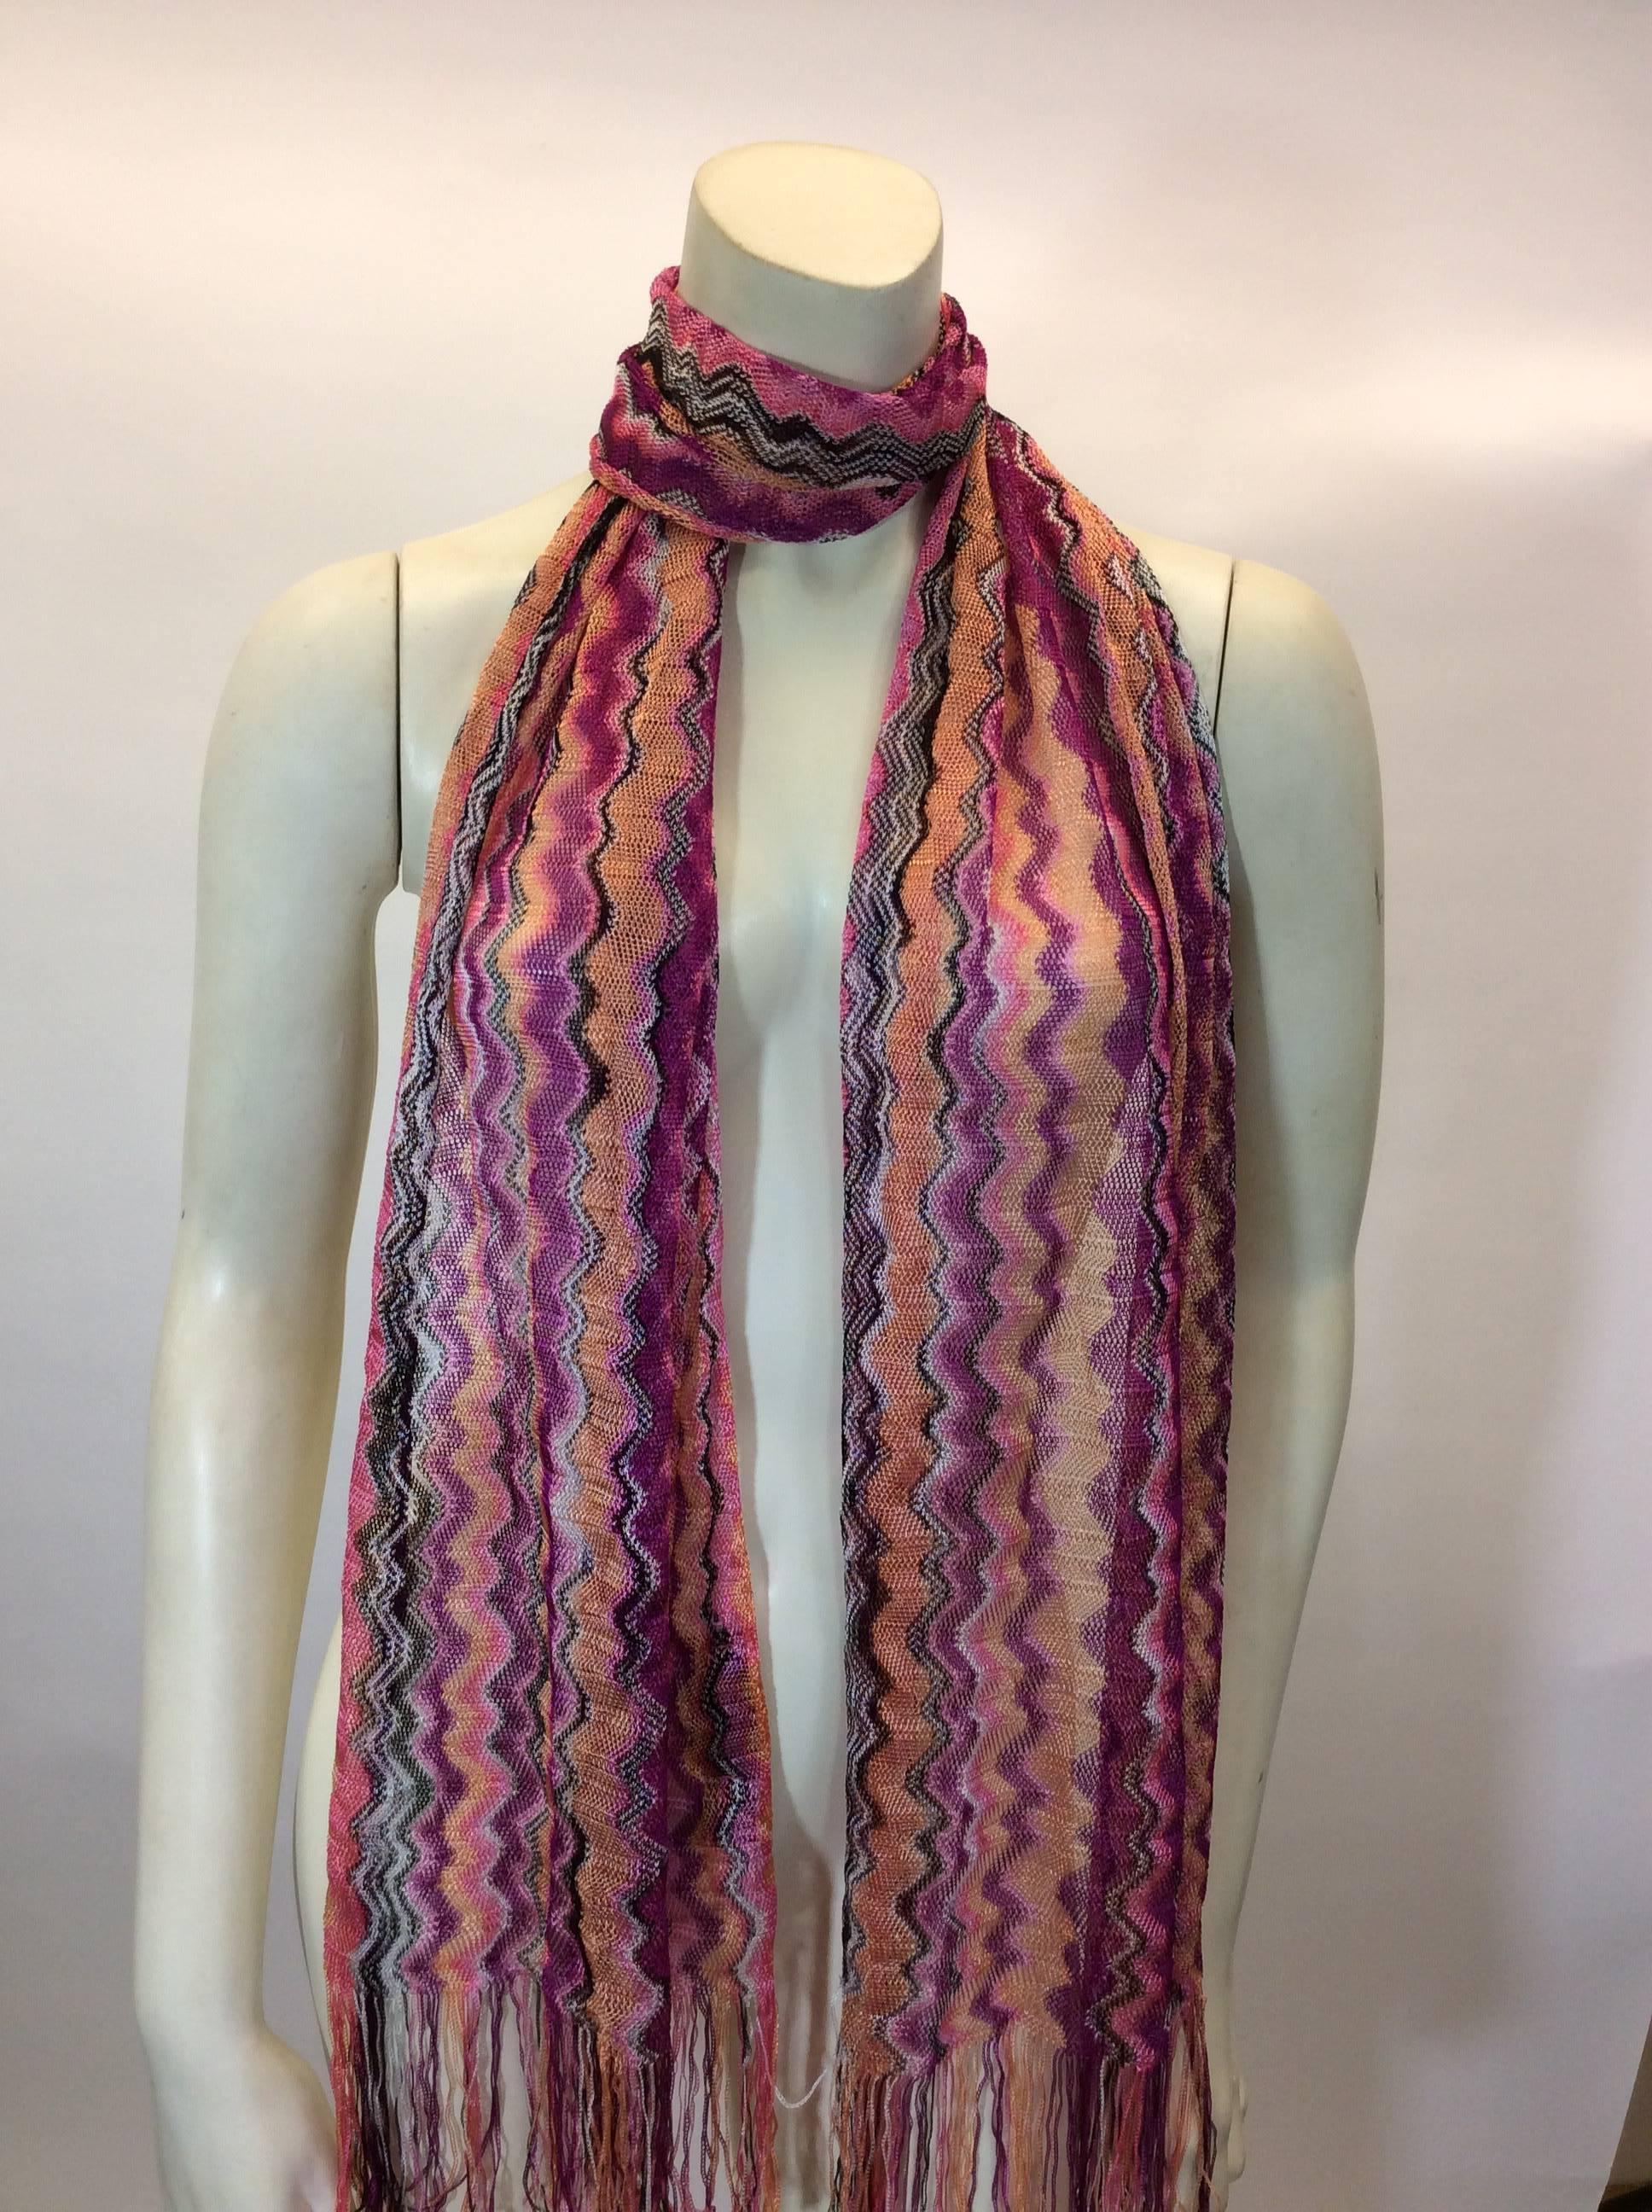 Missoni Pink Chevron Knitted Scarf with Fringe In Excellent Condition For Sale In Narberth, PA